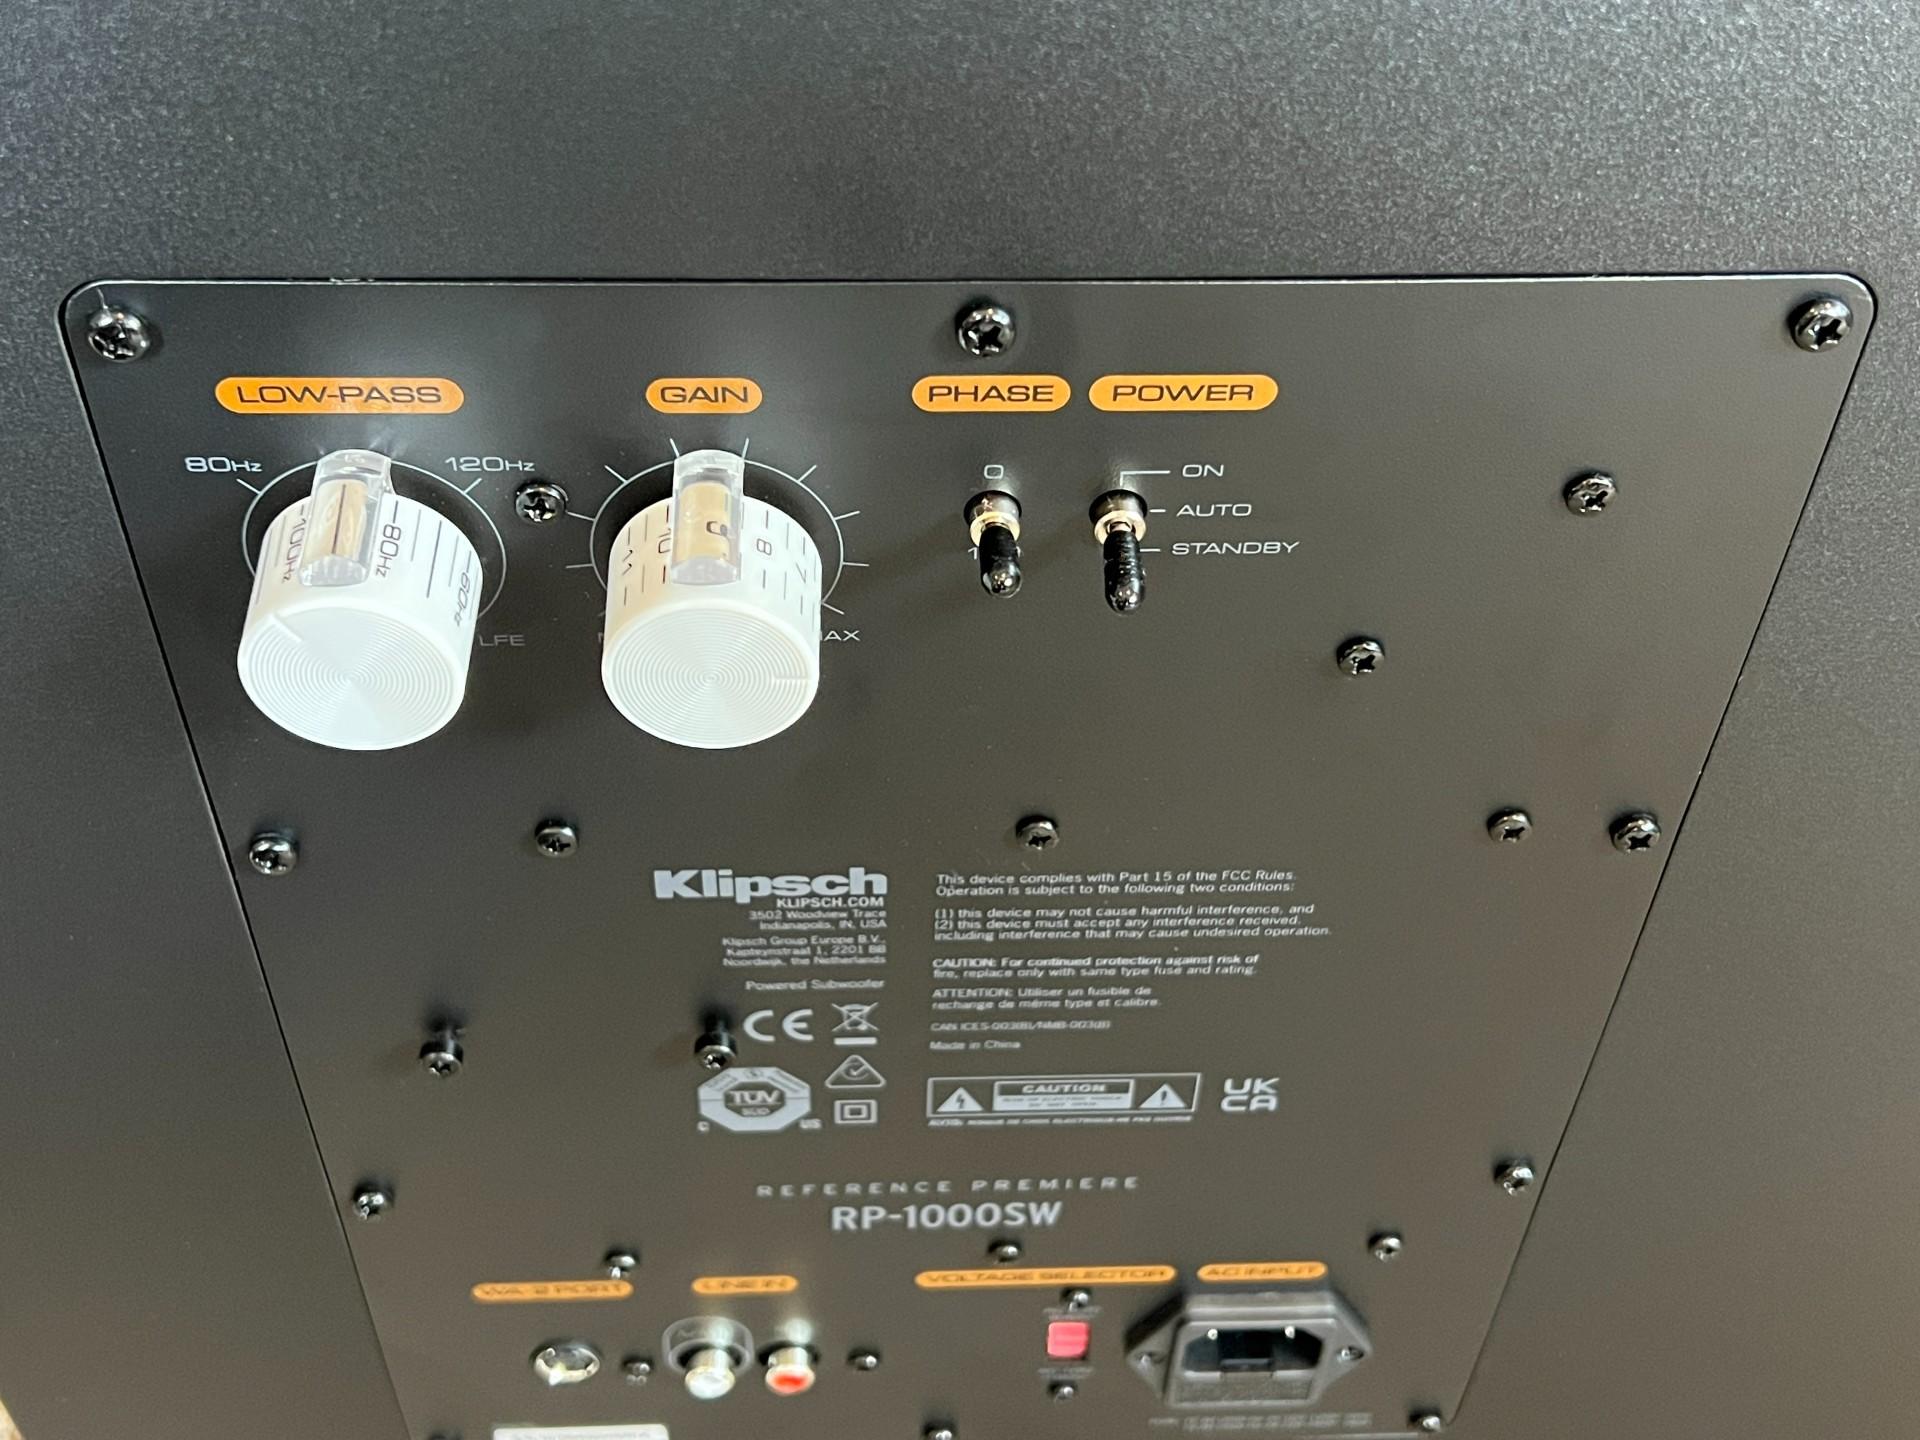 Klipsch RP-1000SW subwoofer back panel settings and dials shown close up.